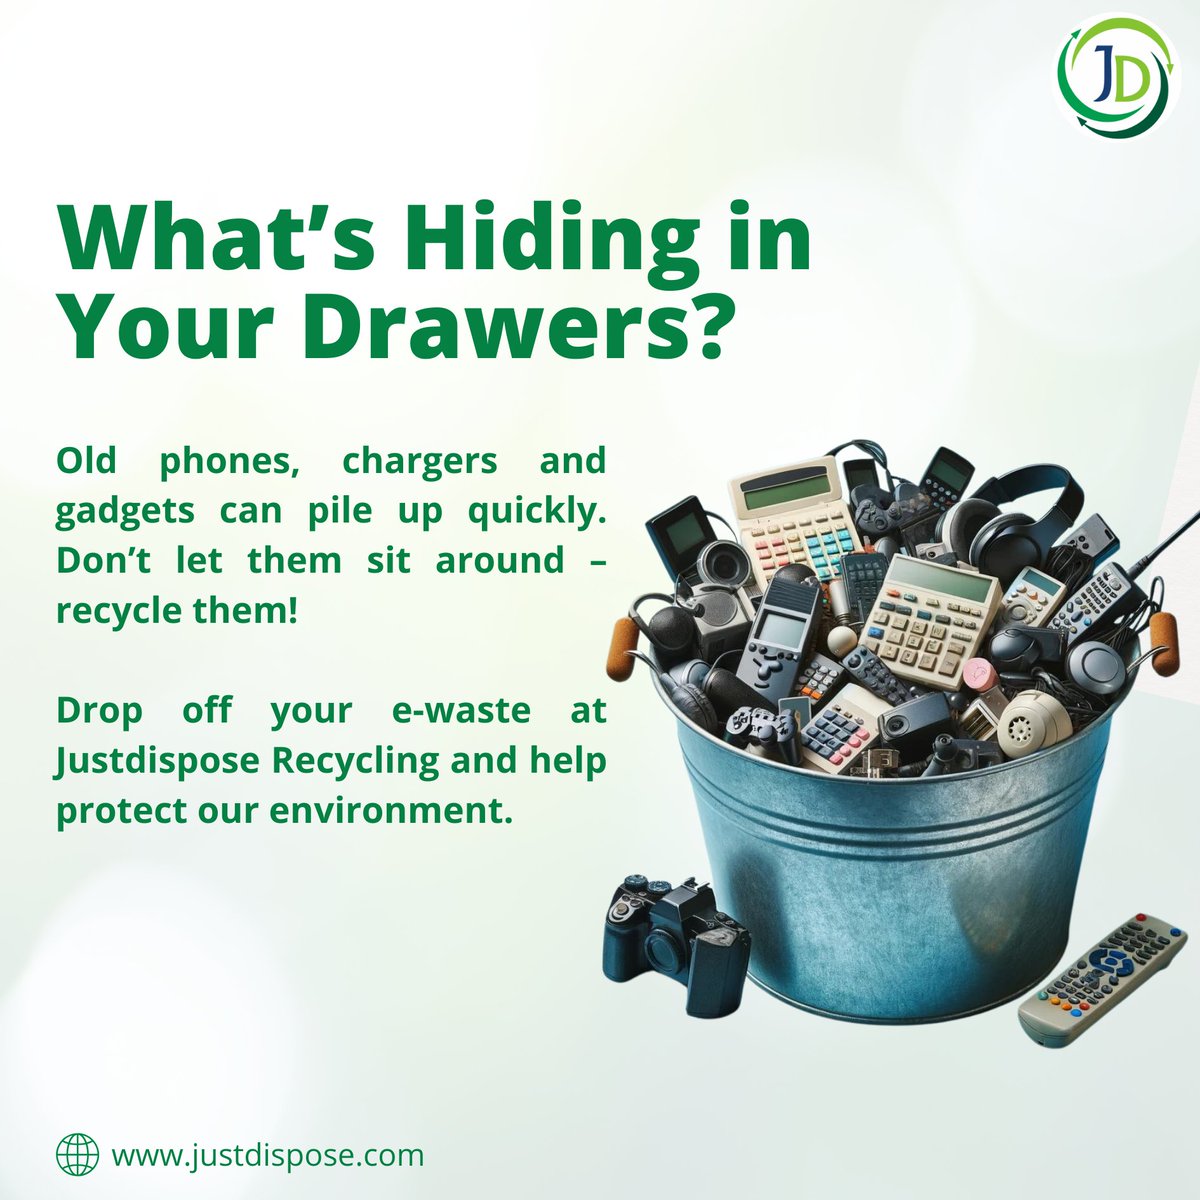 What’s Hiding in Your Drawers? Old gadgets piling up? Recycle them at Justdispose Recycling and help protect our environment!
Visit justdispose.com
.
.
#ewaste #recycling #electronicwaste #smartphones #sustainable #future #ewasterecycling #recycle #ecofriendly #nature